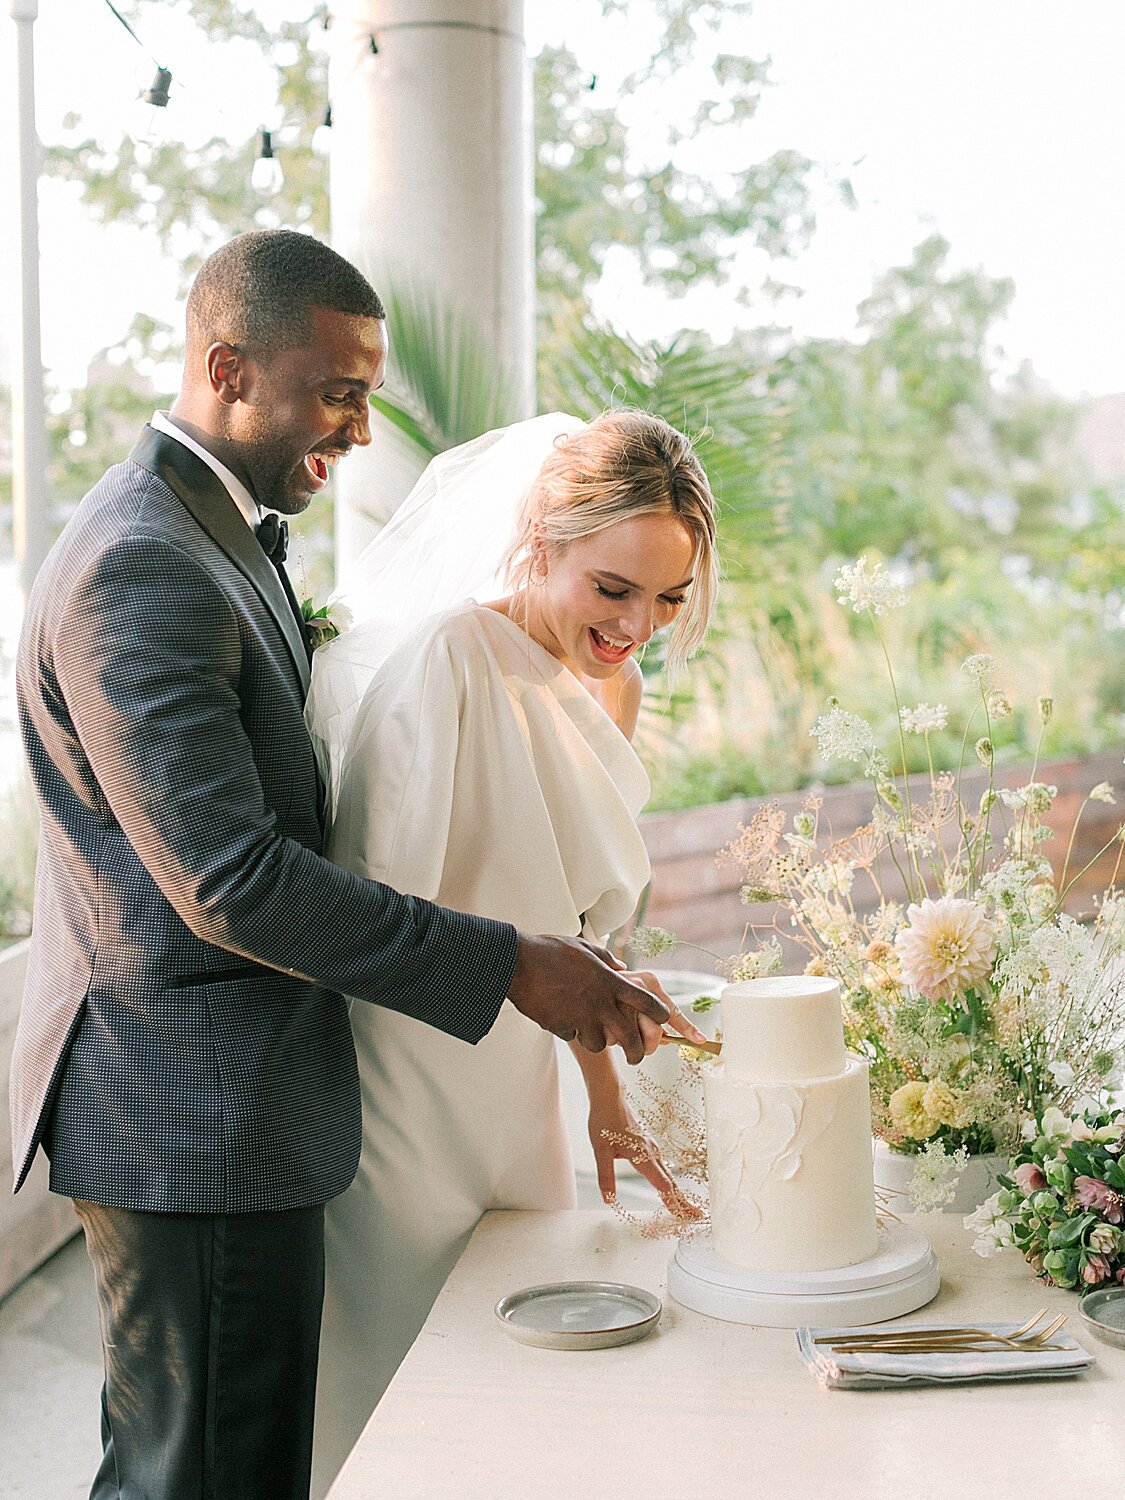 bride and groom cut wedding cake at Celestine | Asher Gardner Photography | Intimate Ceremony in DUMBO New York